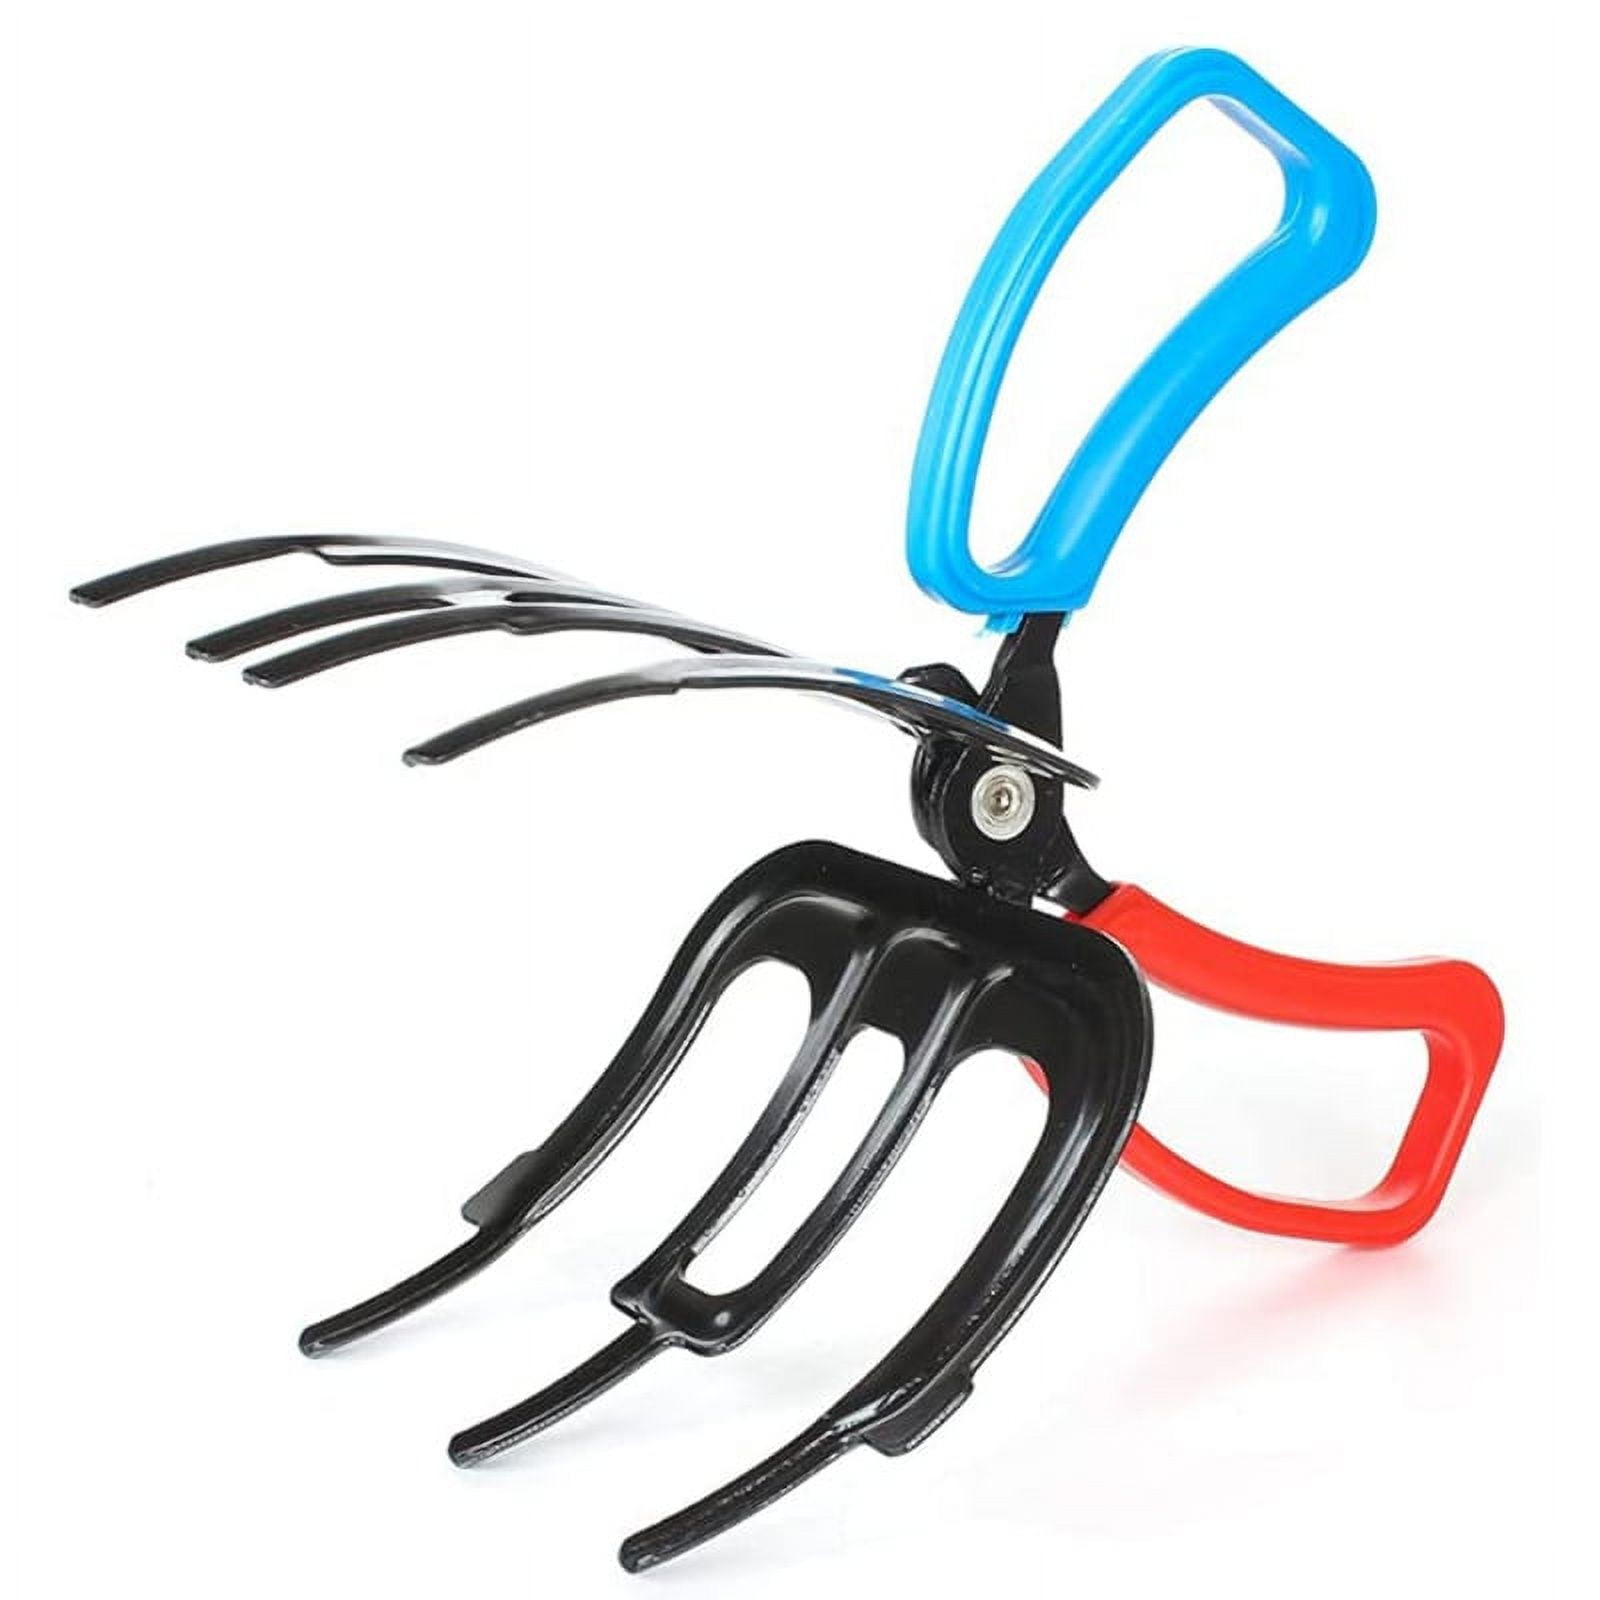  Upgrade 3 Claw Fish Gripper, 2024 New Metal Fishing Pliers  Gripper Fish Control Clamp, Multifunctional Three Teeth Fishing Pliers for  Most Freshwater Fish Grip Tackle Holder (2 Claw) : Sports & Outdoors